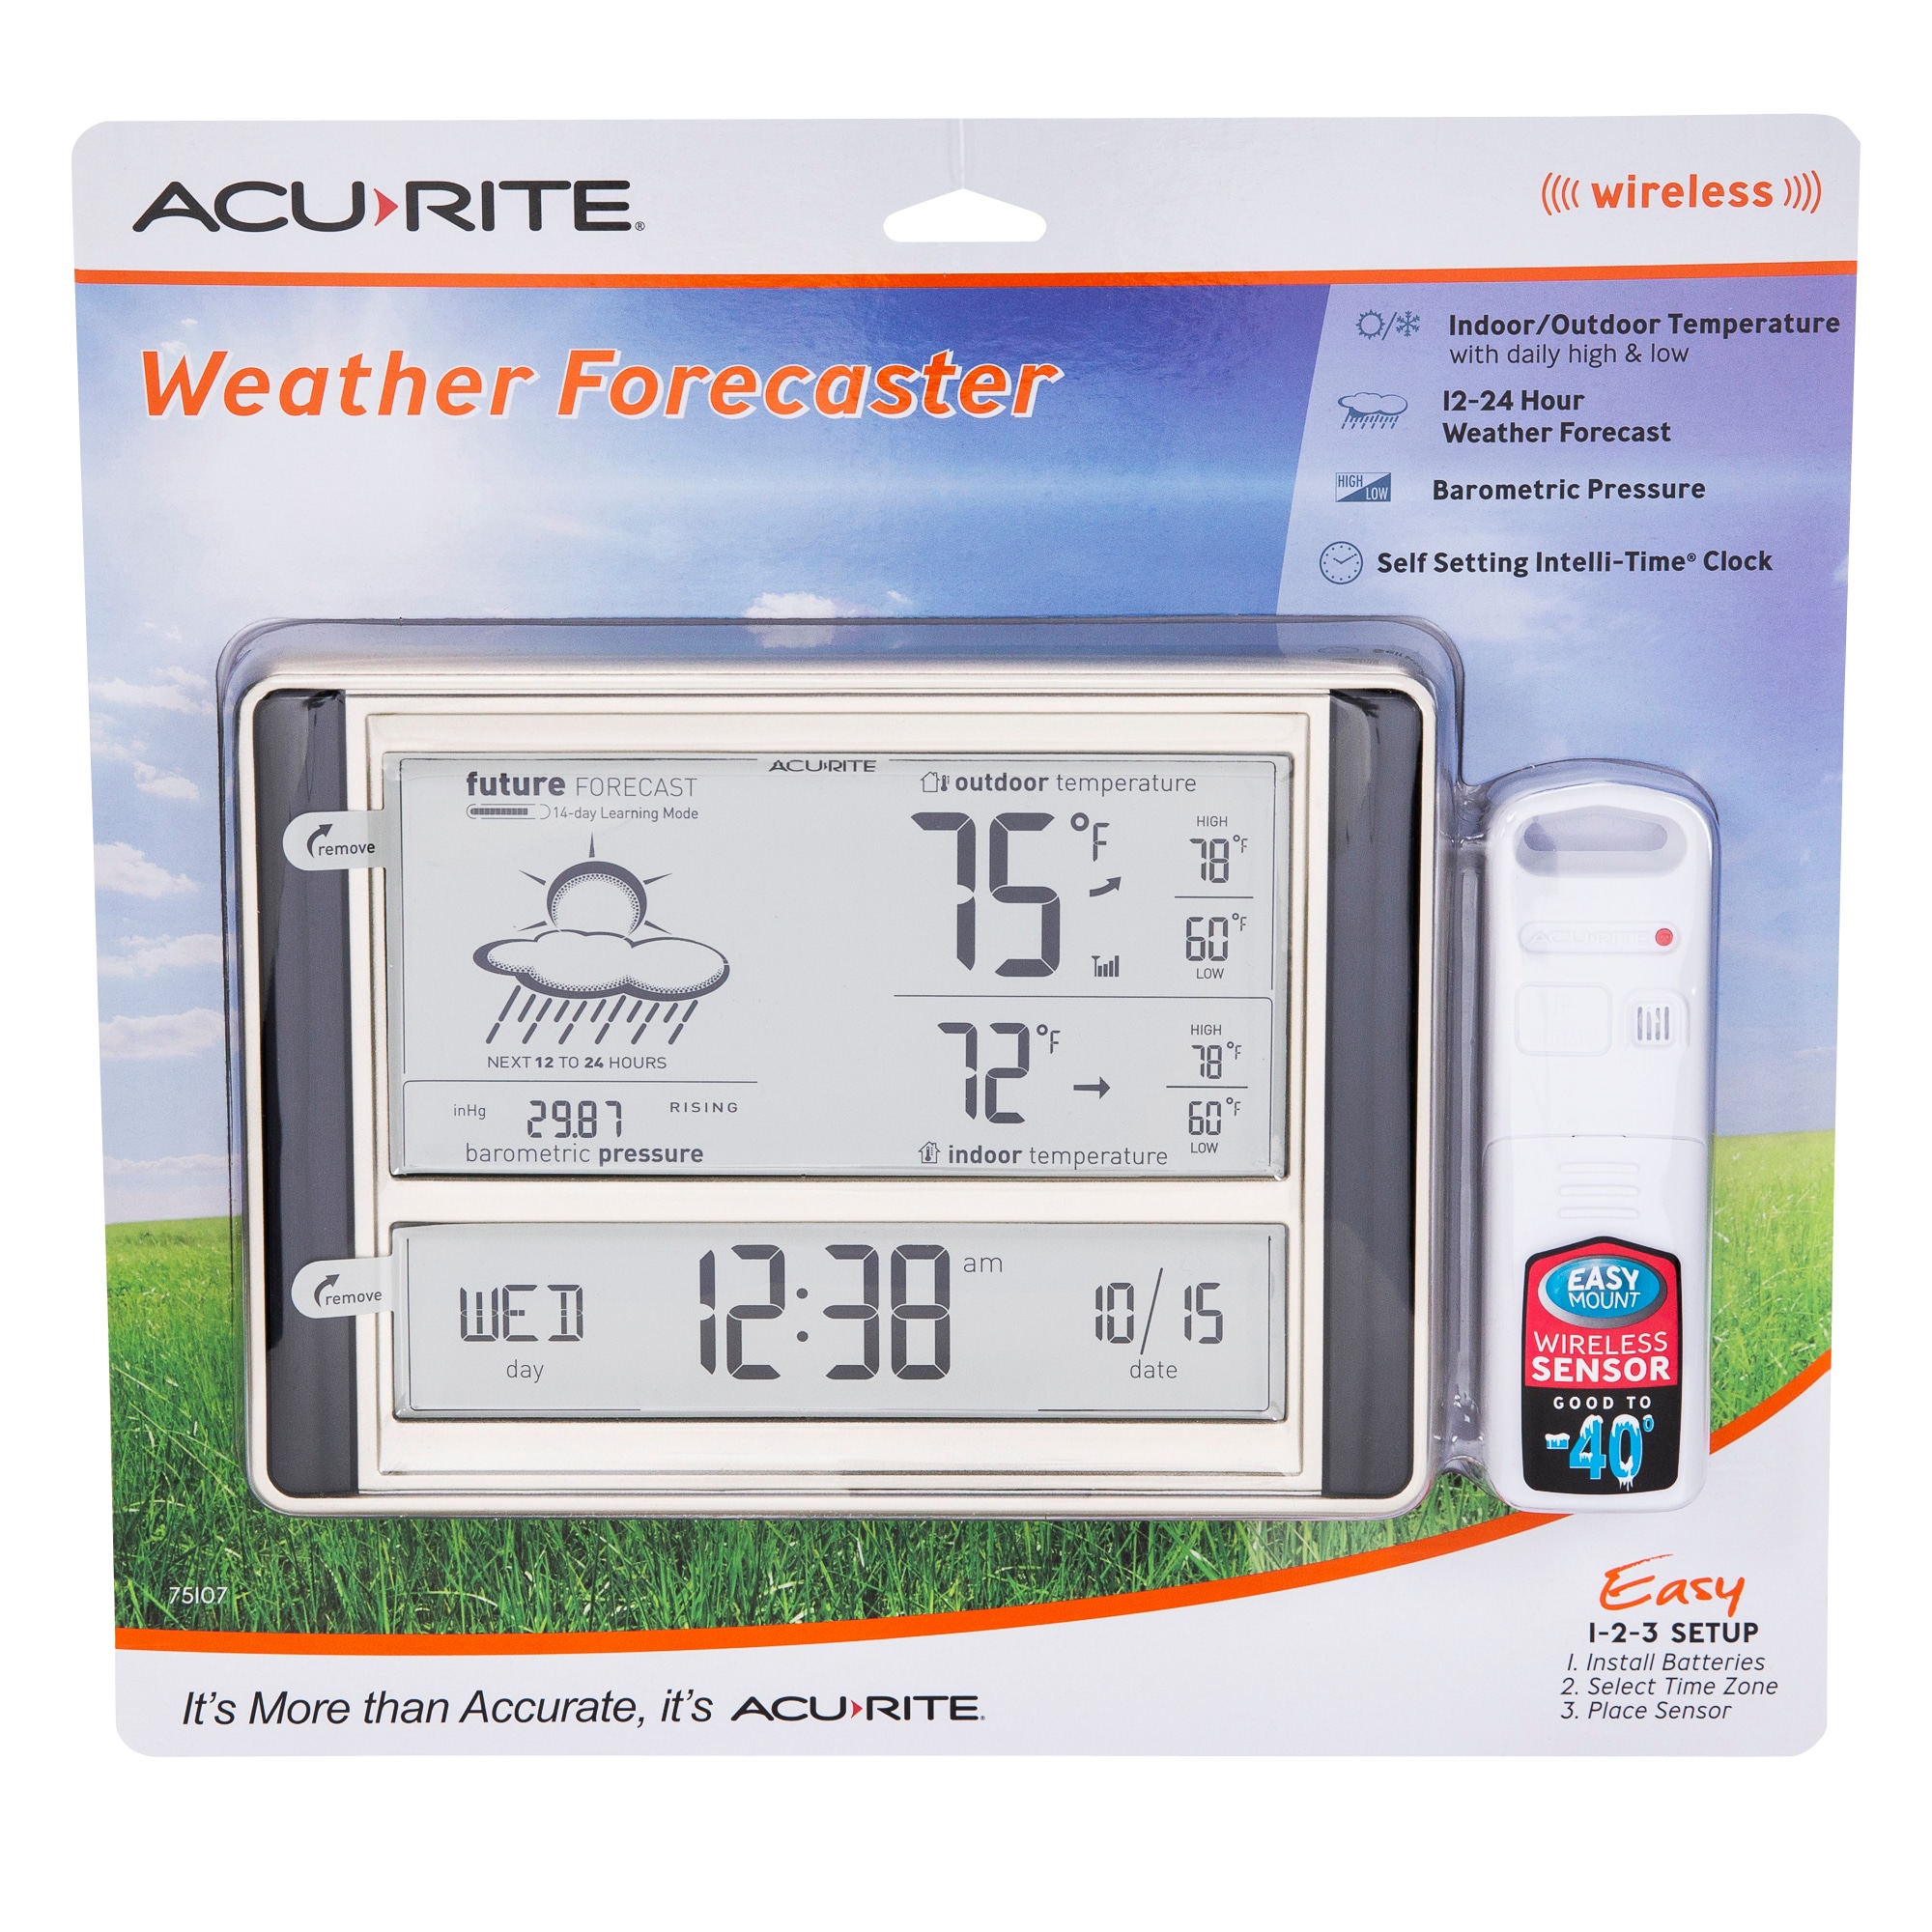 Adjustable Backlight Weather Forecast Station with Atomic Clock 20C Protmex Wireless Weather Stations Indoor Outdoor with 3 Outdoor Sensor Grey